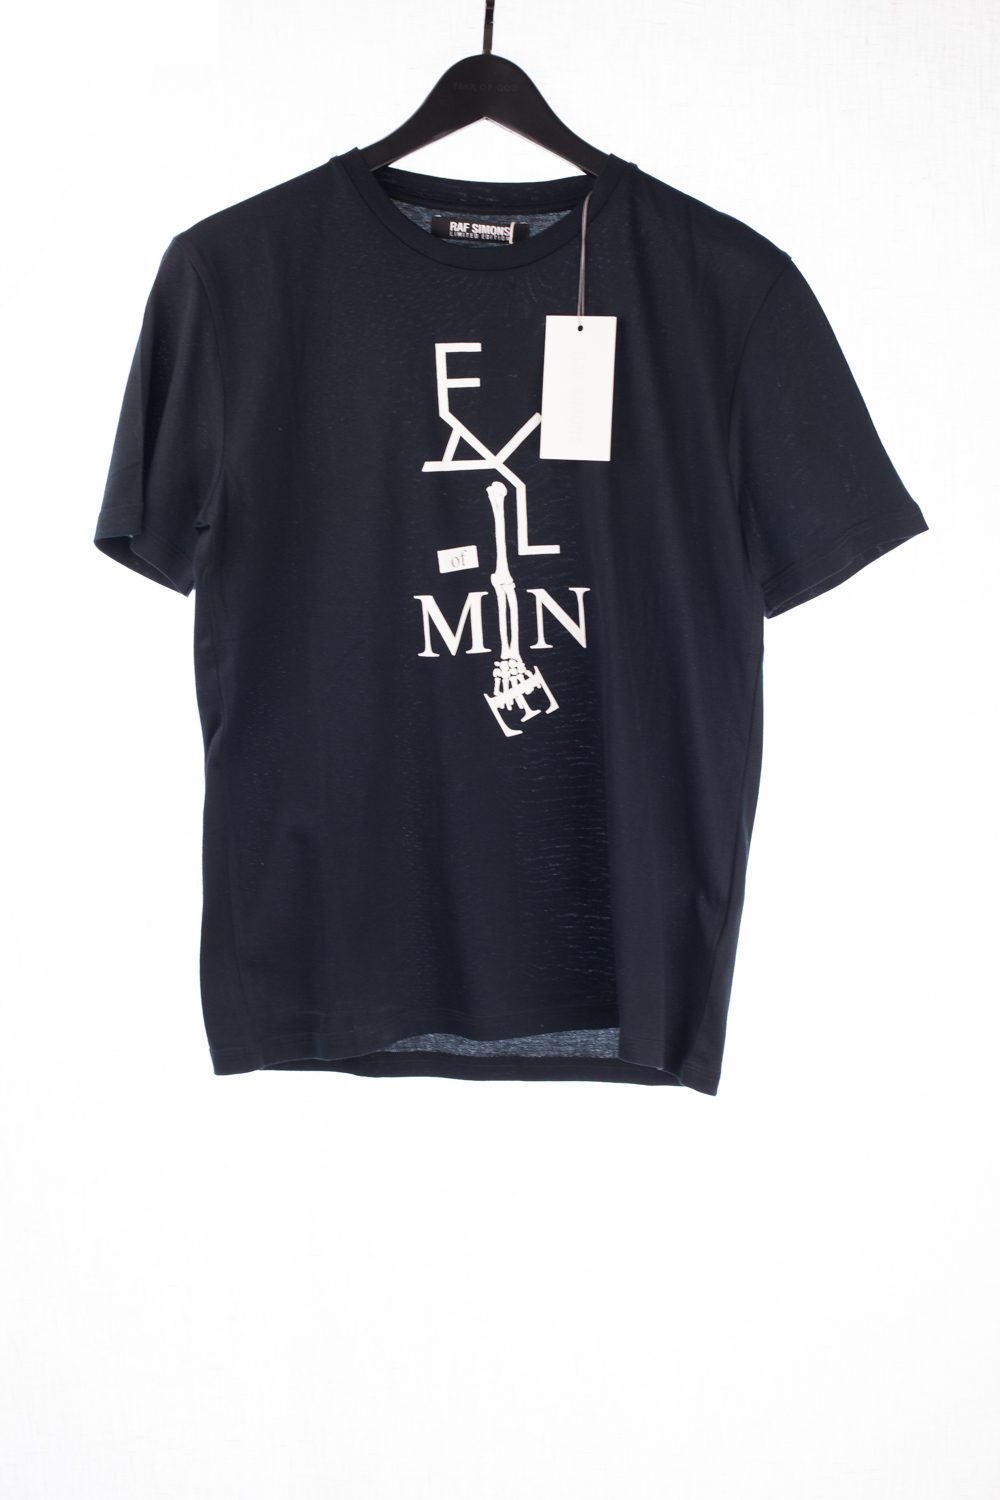 NWT “Fall of Men” Limited Edition Tee